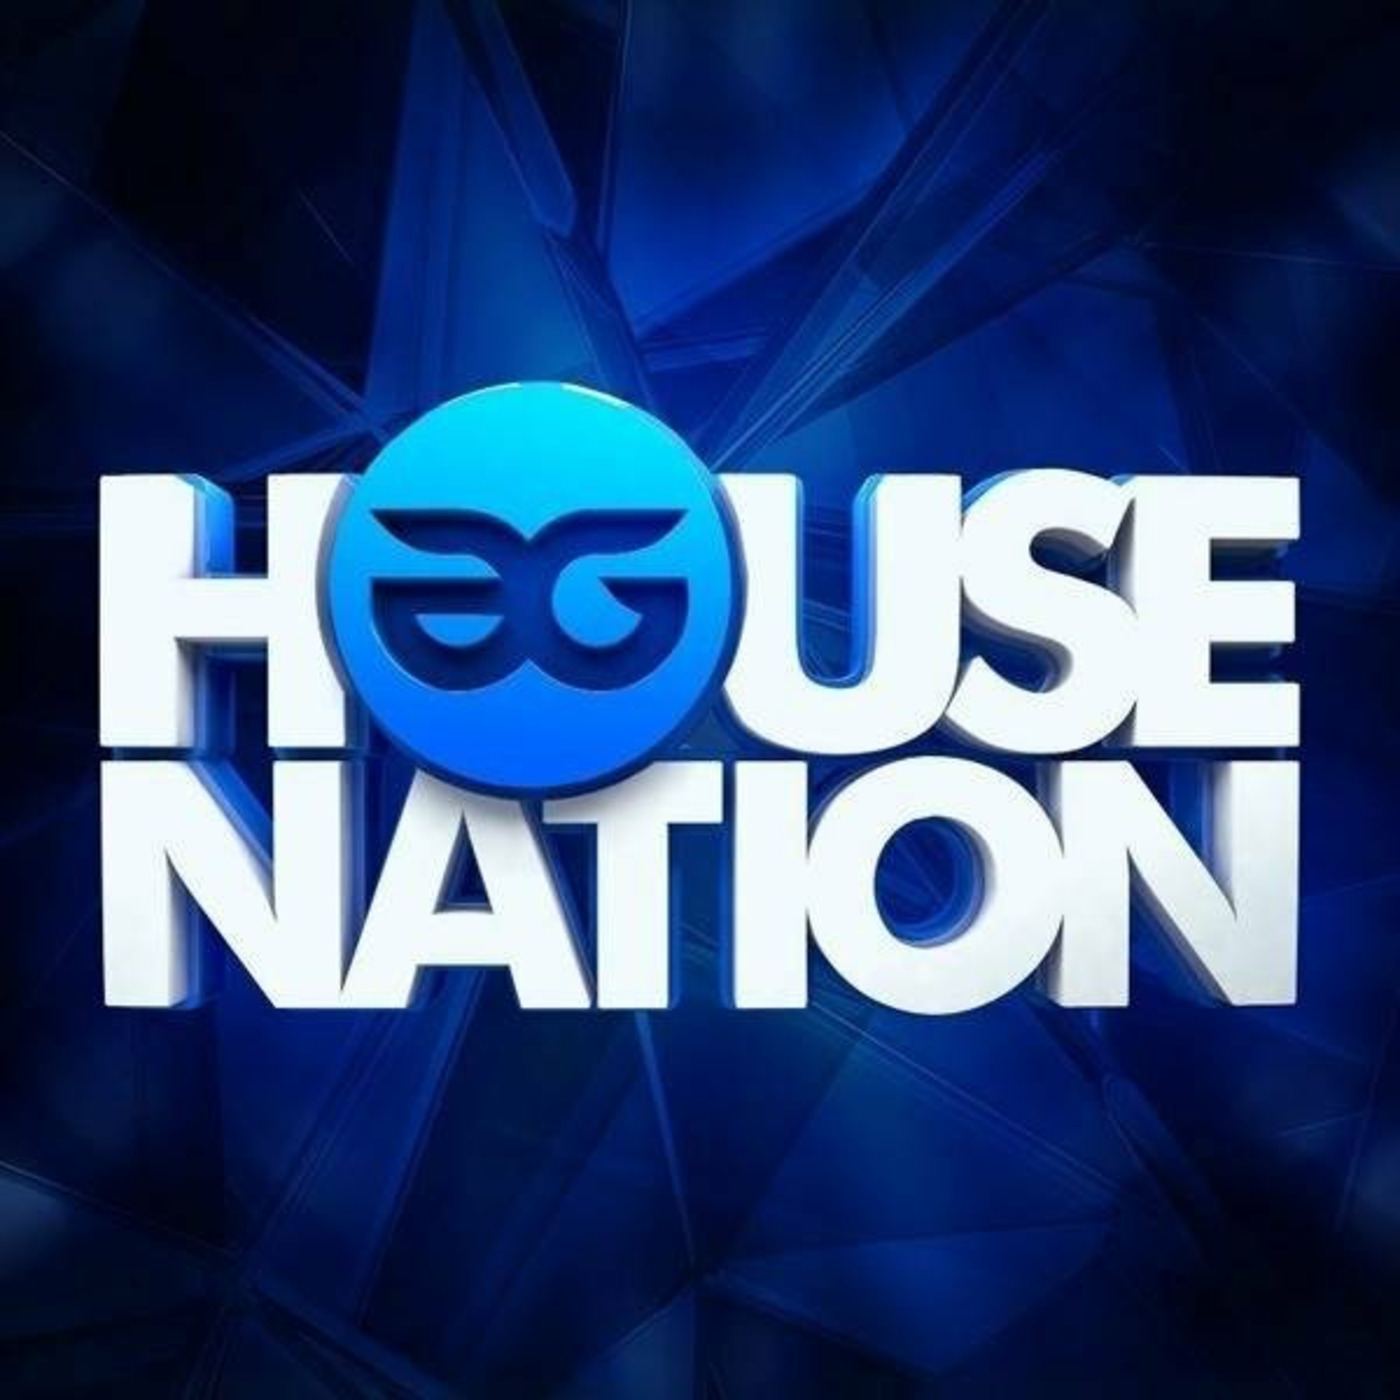 ADRIANO GOES - HOUSE NATION - 210221